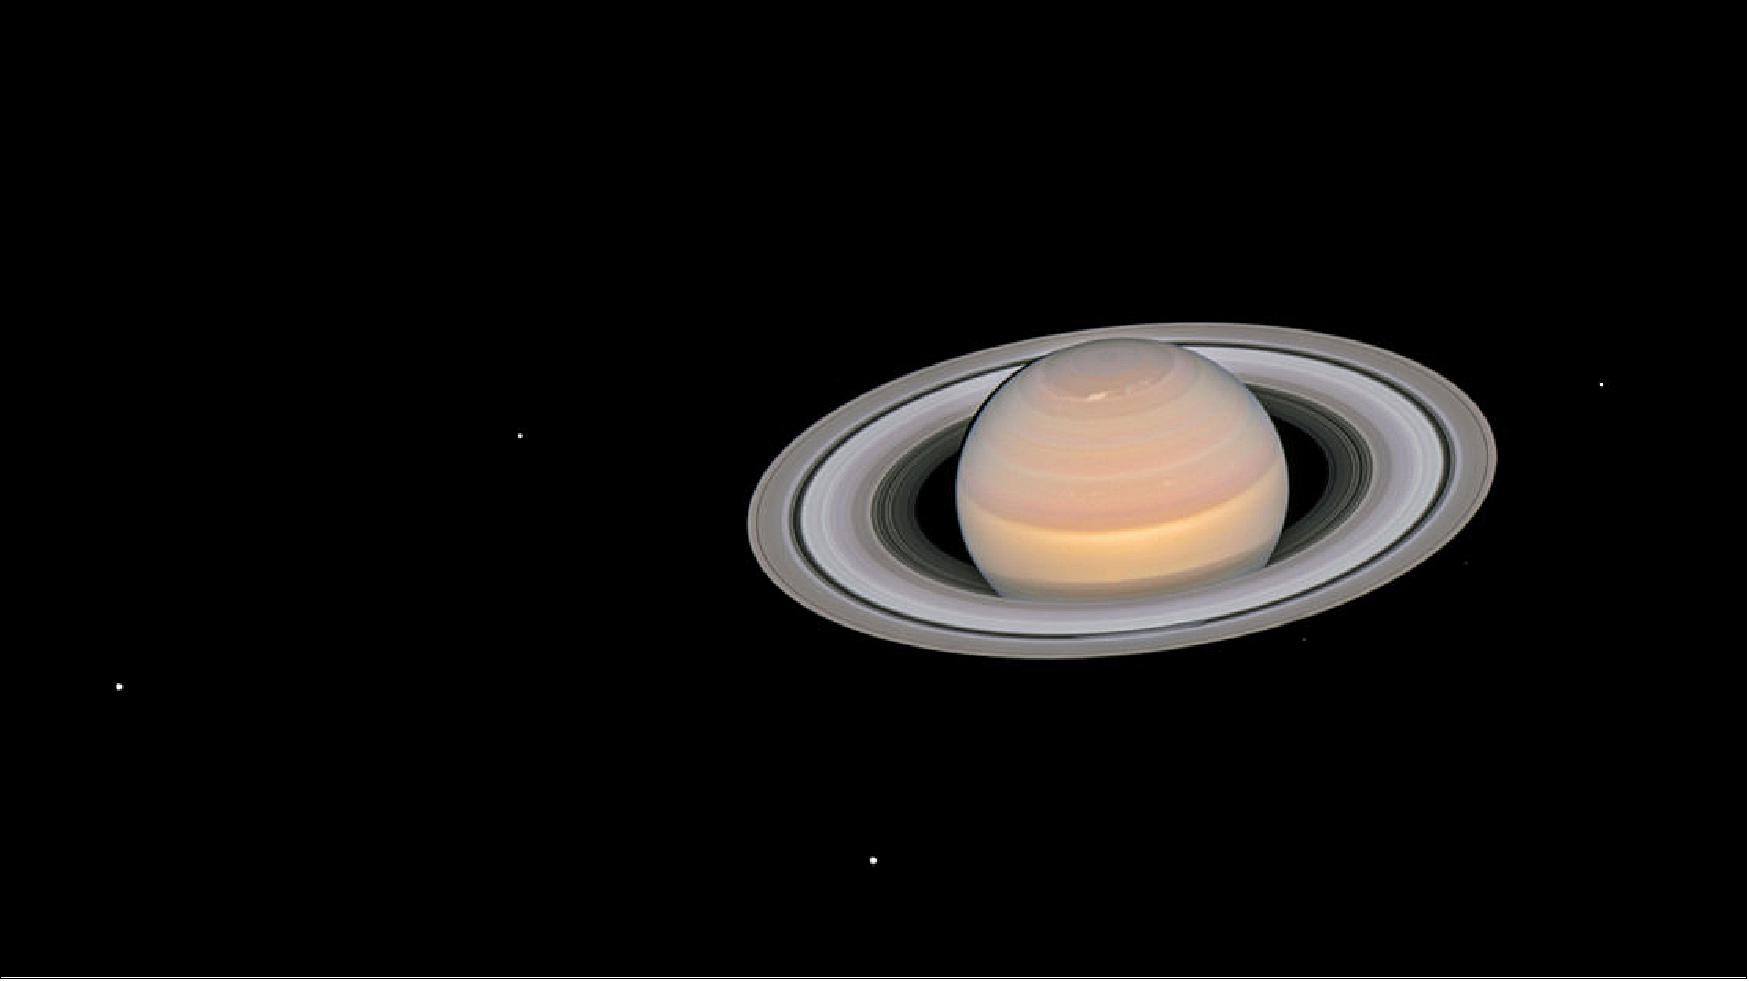 Figure 22: A composite image taken by Hubble on 6 June 2018 showing a fully-illuminated Saturn and its rings, along with six of its 62 known moons. The visible moons are (from left to right) Dione, Enceladus, Tethys, Janus, Epimetheus and Mimas (image credit: NASA, ESA, A. Simon (GSFC) and the OPAL Team, and J. DePasquale (STScI); CC BY 4.0)